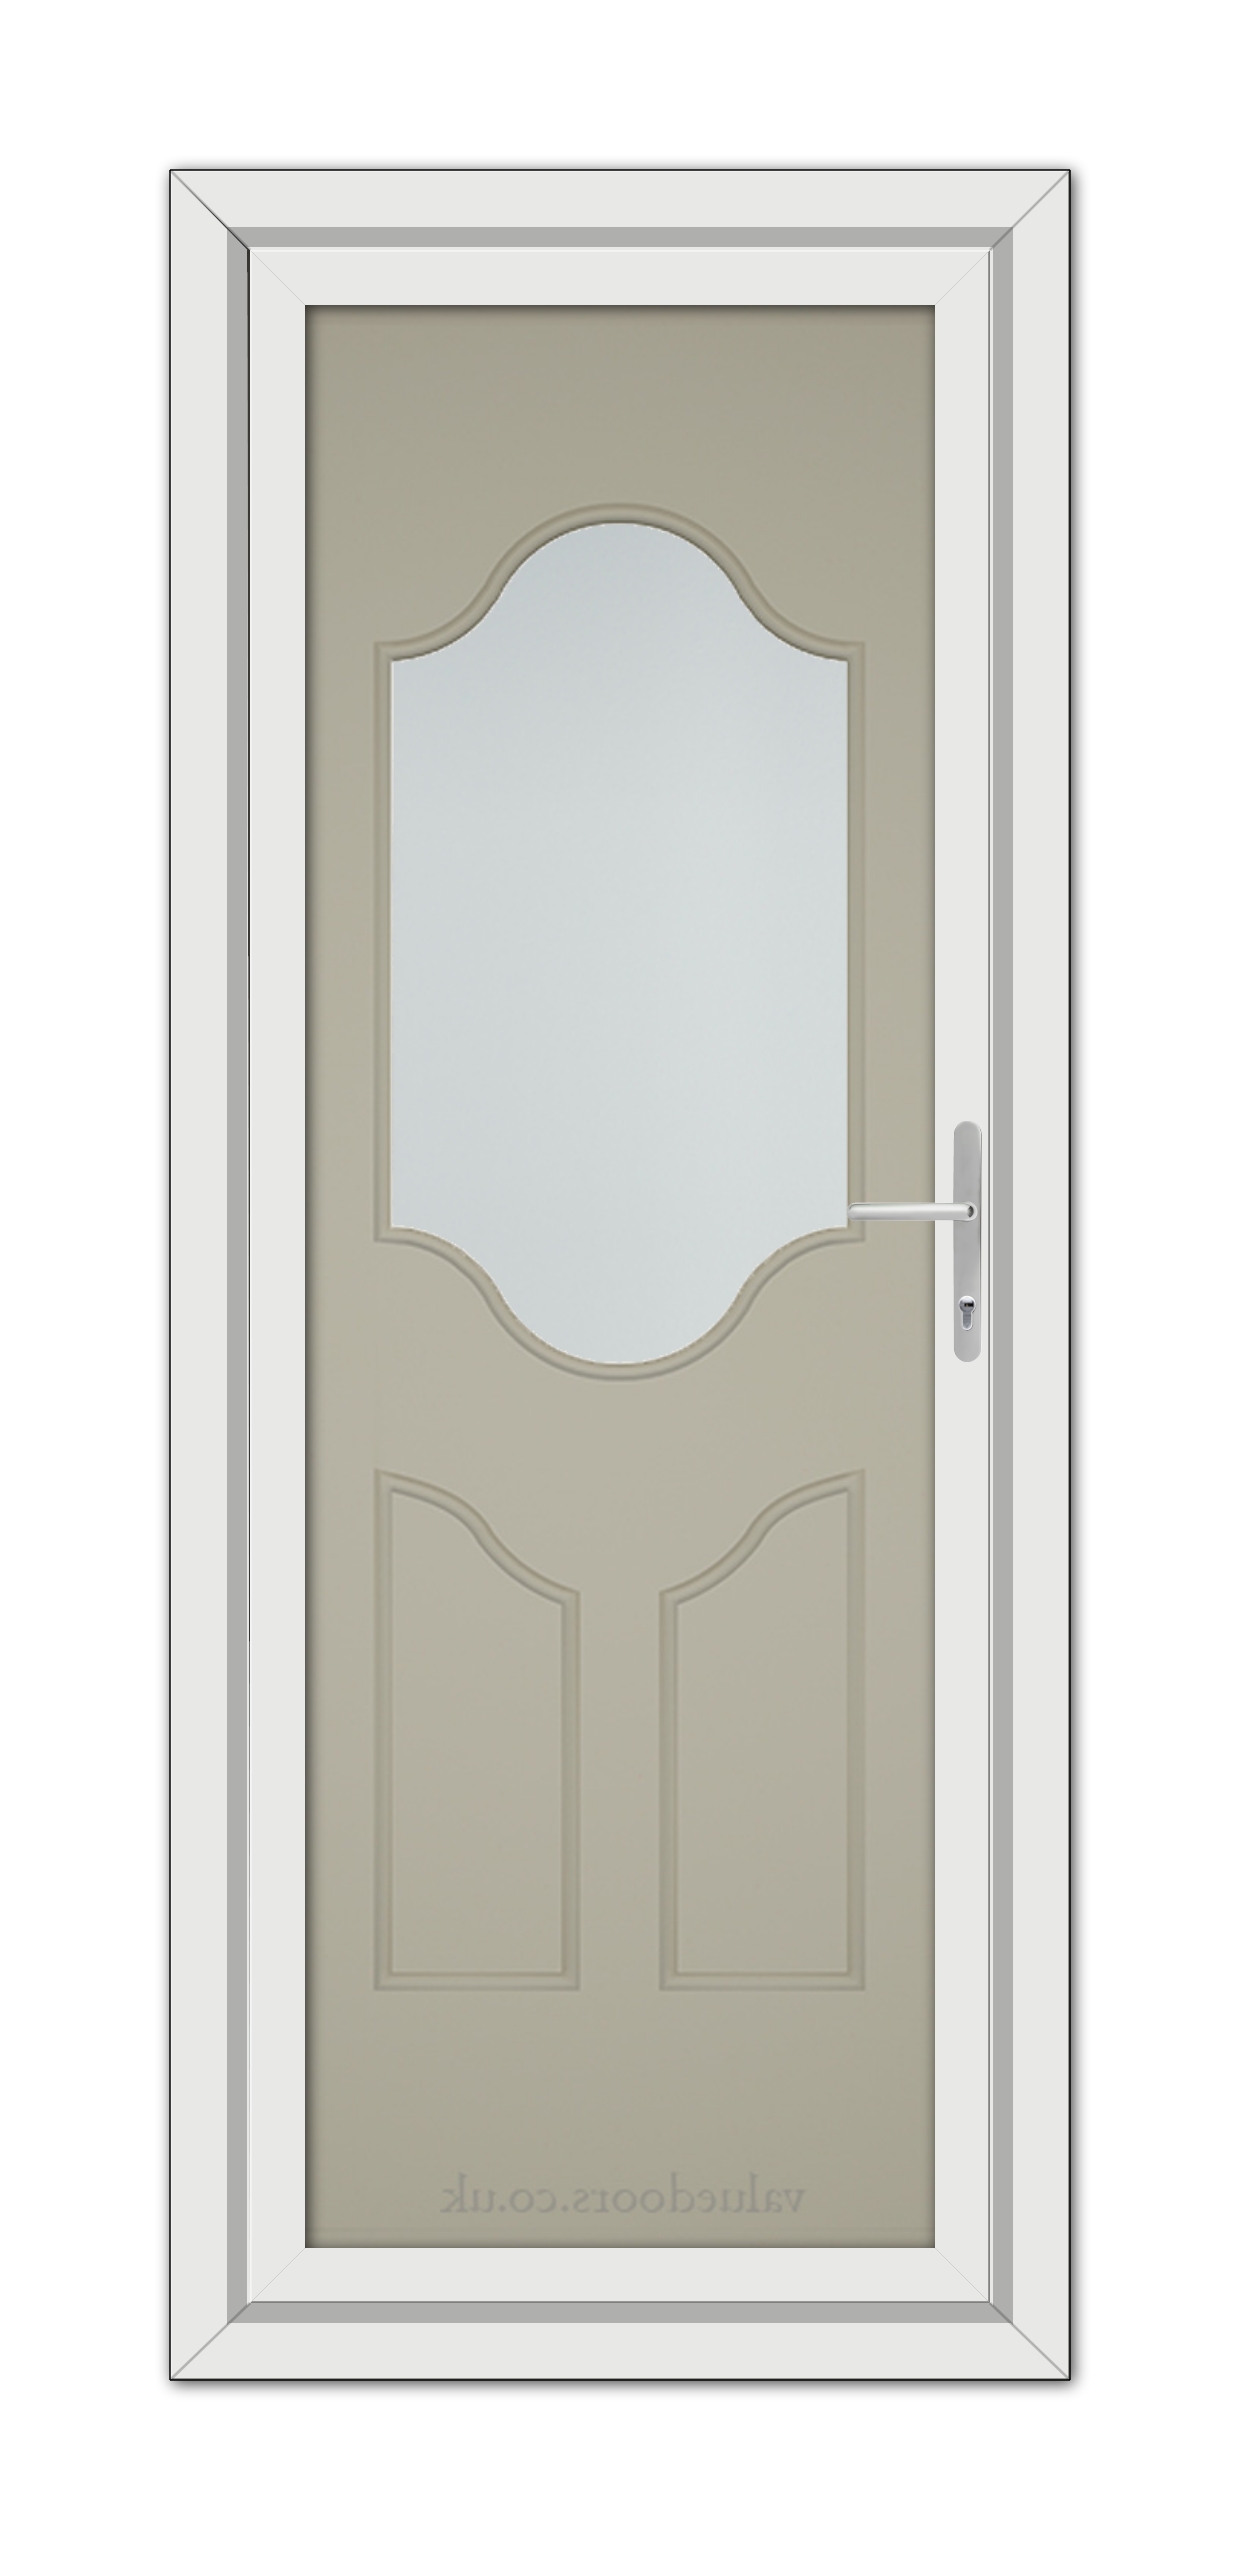 A modern Pebble Grey Althorpe One uPVC door featuring an arched window near the top, two recessed panels, and a simple metallic handle, set within a white frame.